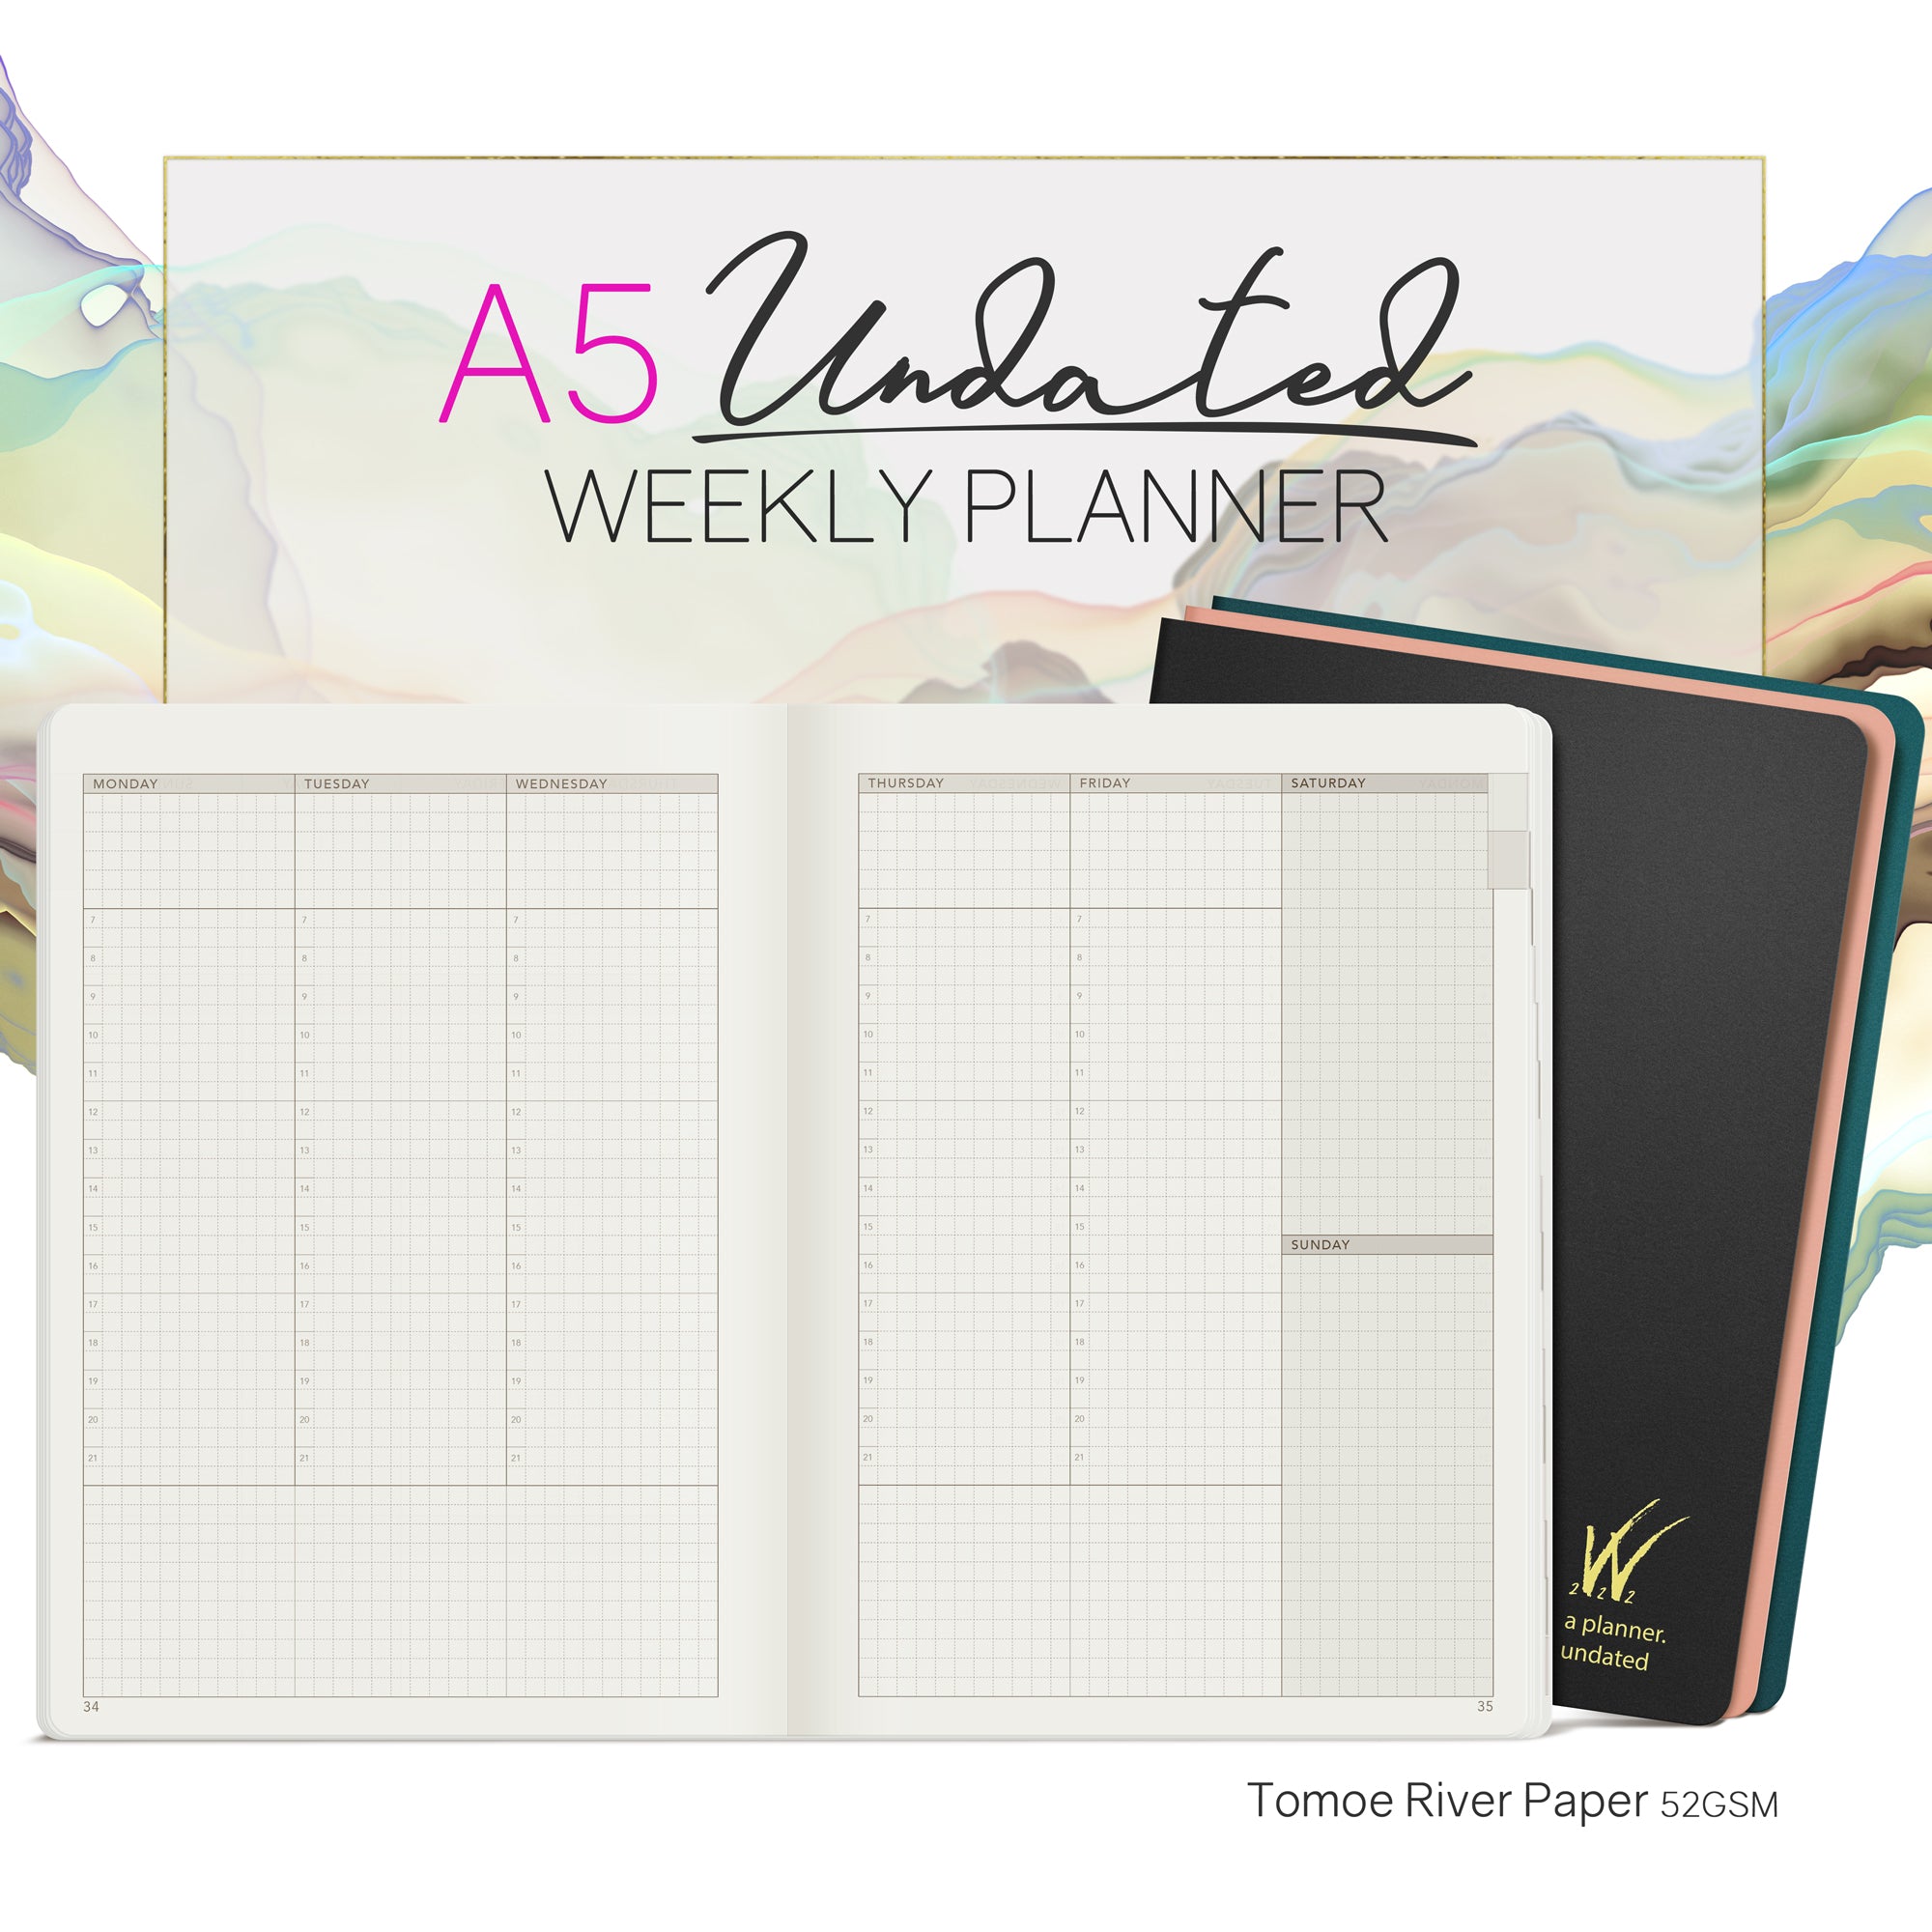 Wonderland222-A5-Undated-Planner-Open-with-Covers-Website.jpg